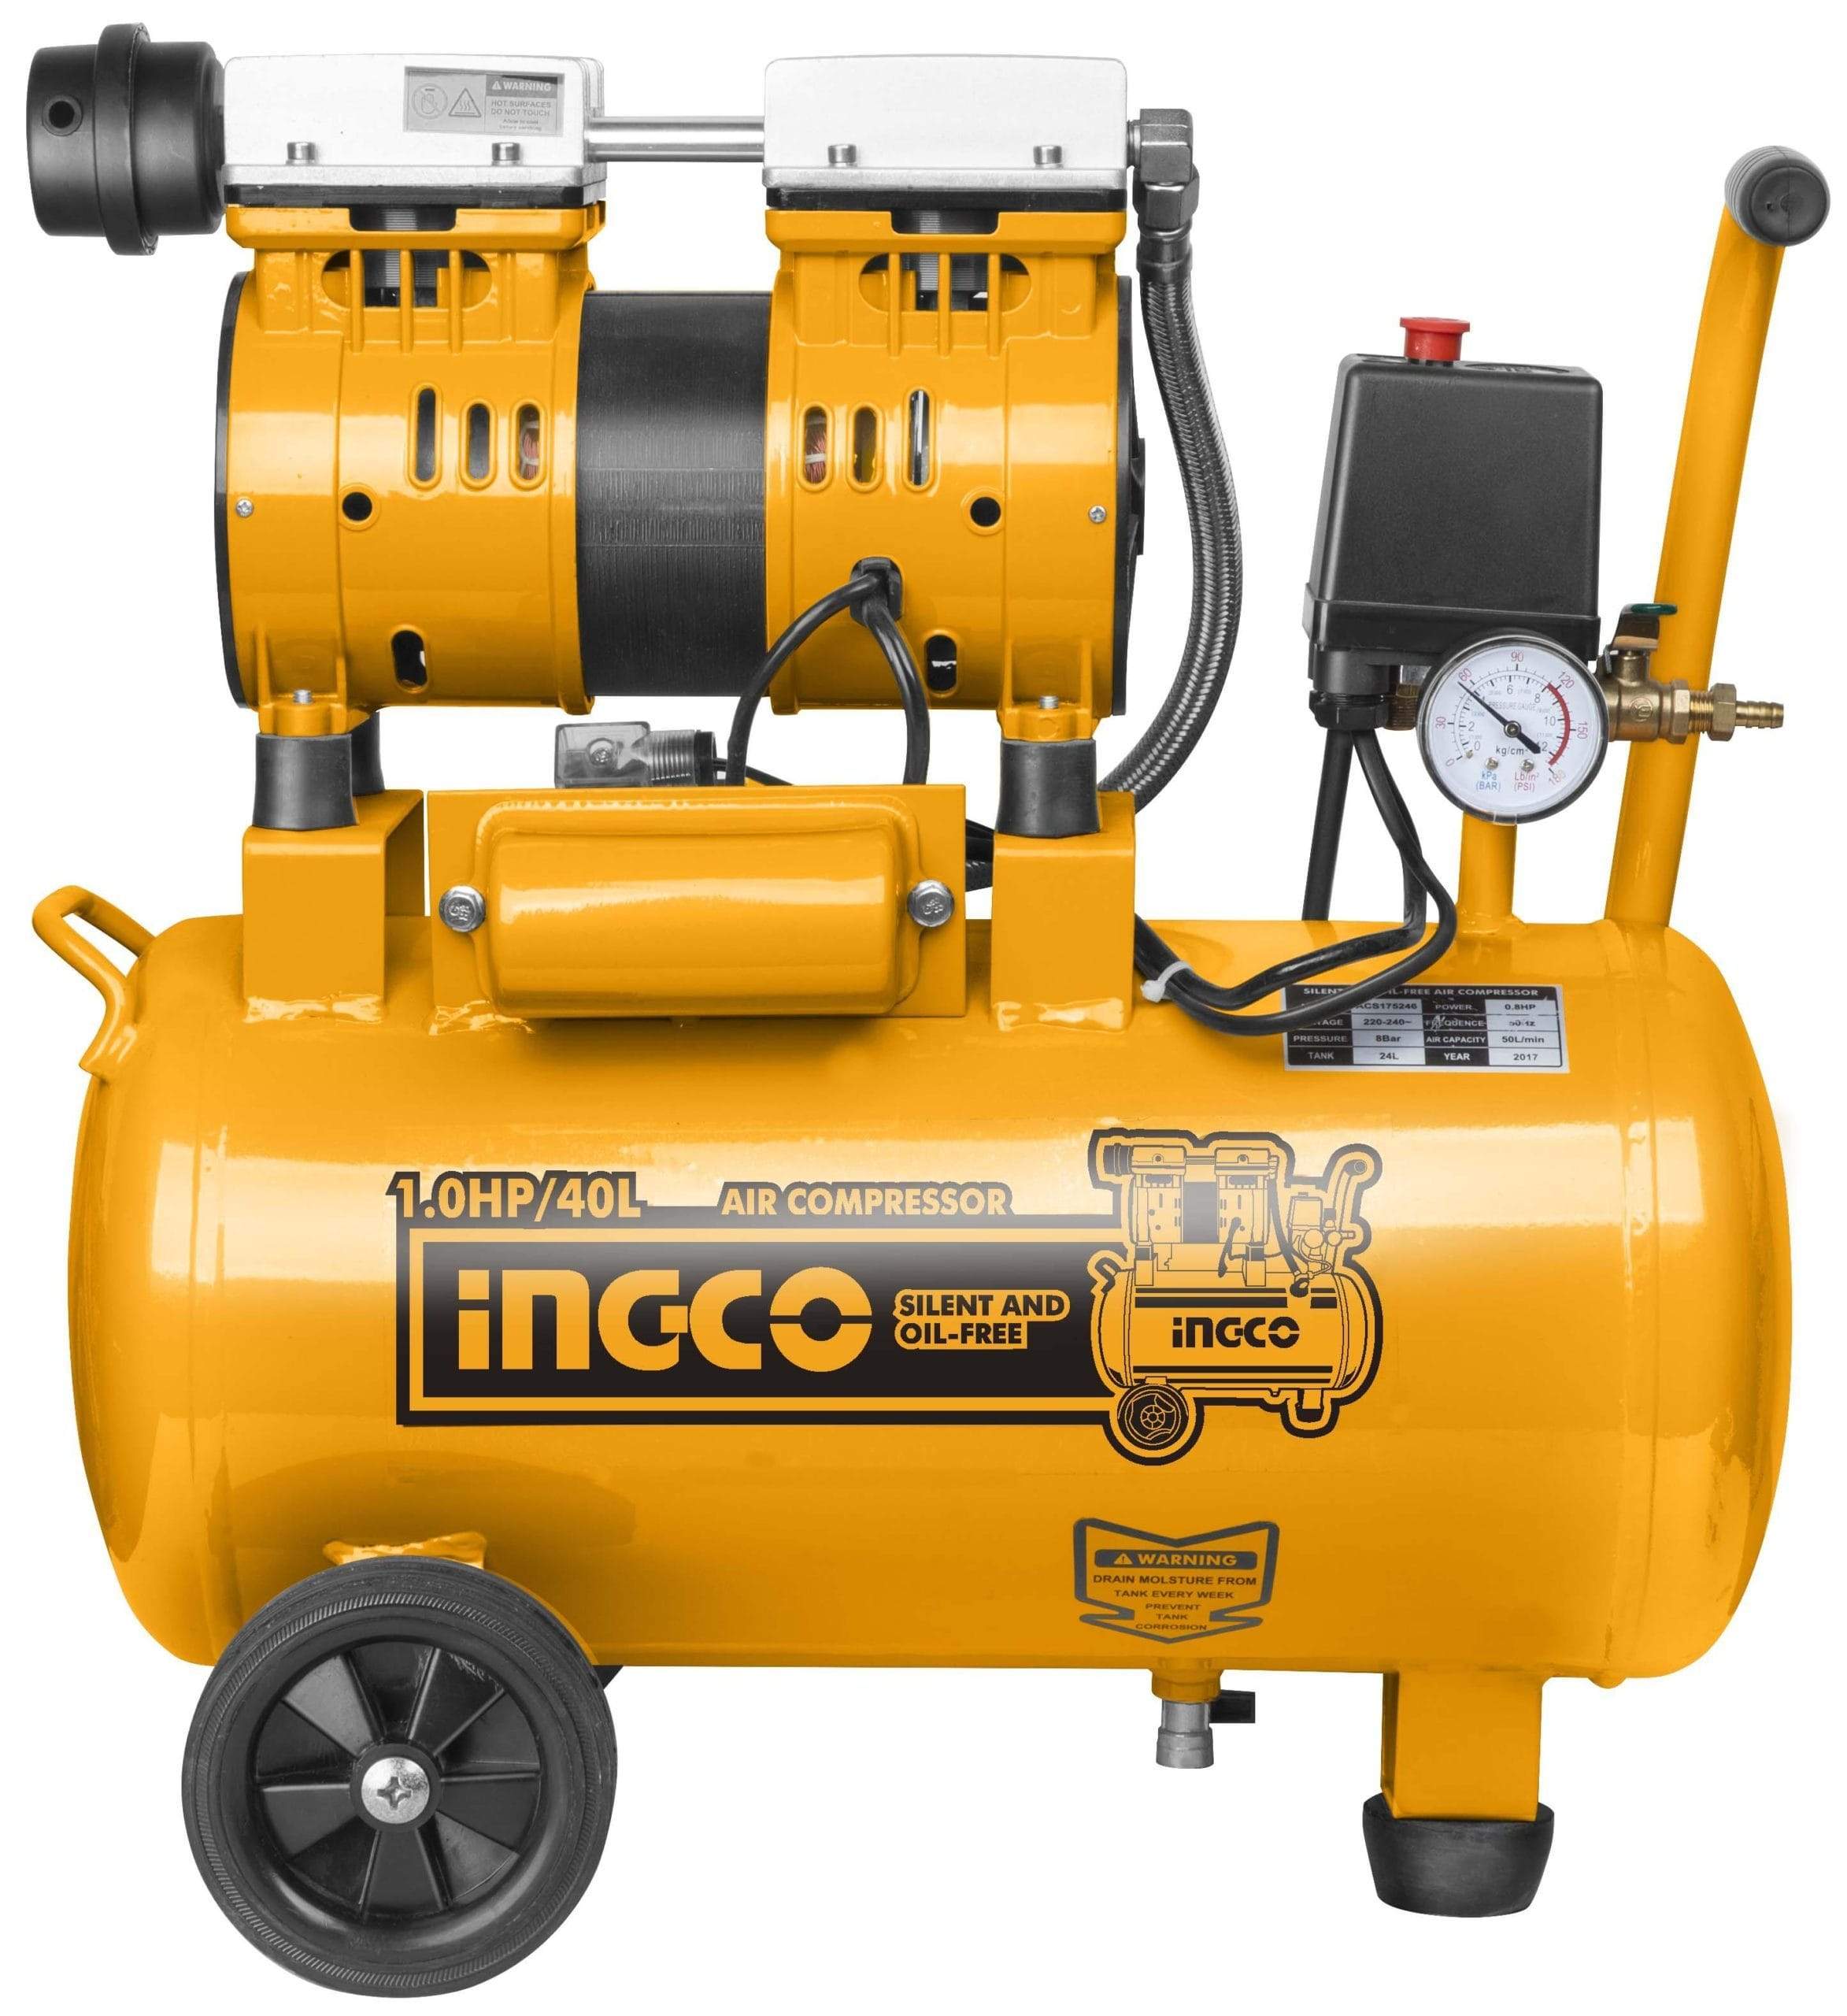 Ingco Silent And Oil Free Air Compressor 1.0HP 40L - ACS175406 | Supply Master | Accra, Ghana Tools Building Steel Engineering Hardware tool